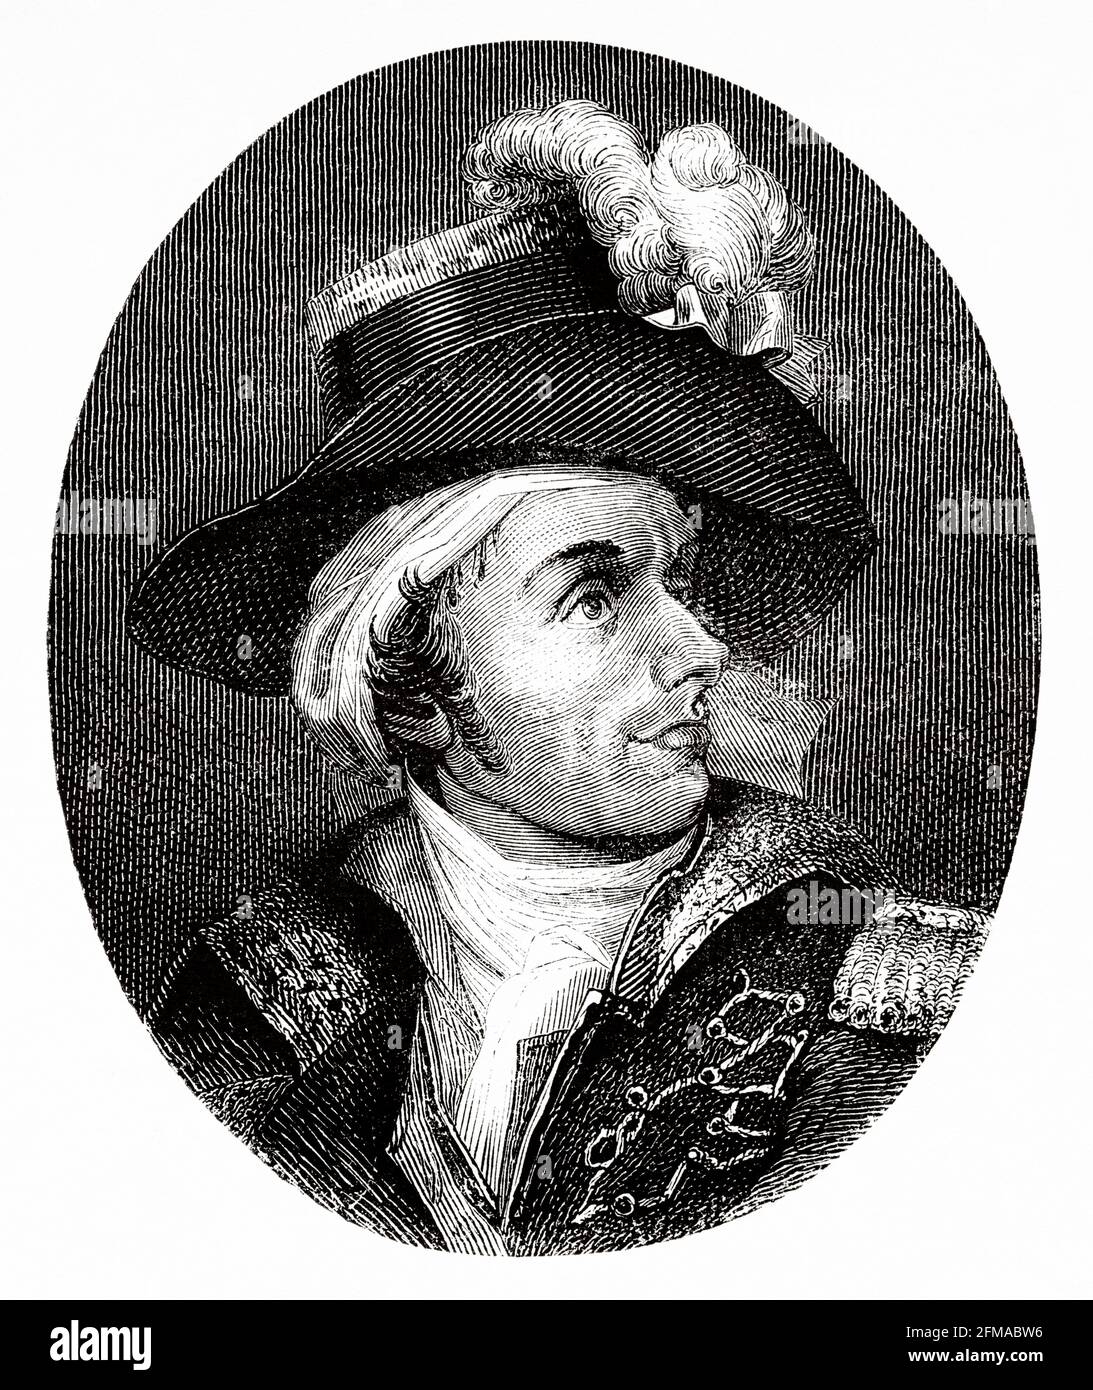 Portrait of François Athanase de Charette de la Contrie (1763-1796) French Royalist soldier and politician. He served in the French Royal Navy during the American Revolutionary War and was one of the leaders of the Revolt in the Vendée against the revolutionary regime. France. Old 19th century engraved illustration from Histoire de la Revolution Francaise 1876 by Jules Michelet (1798-1874) Stock Photo